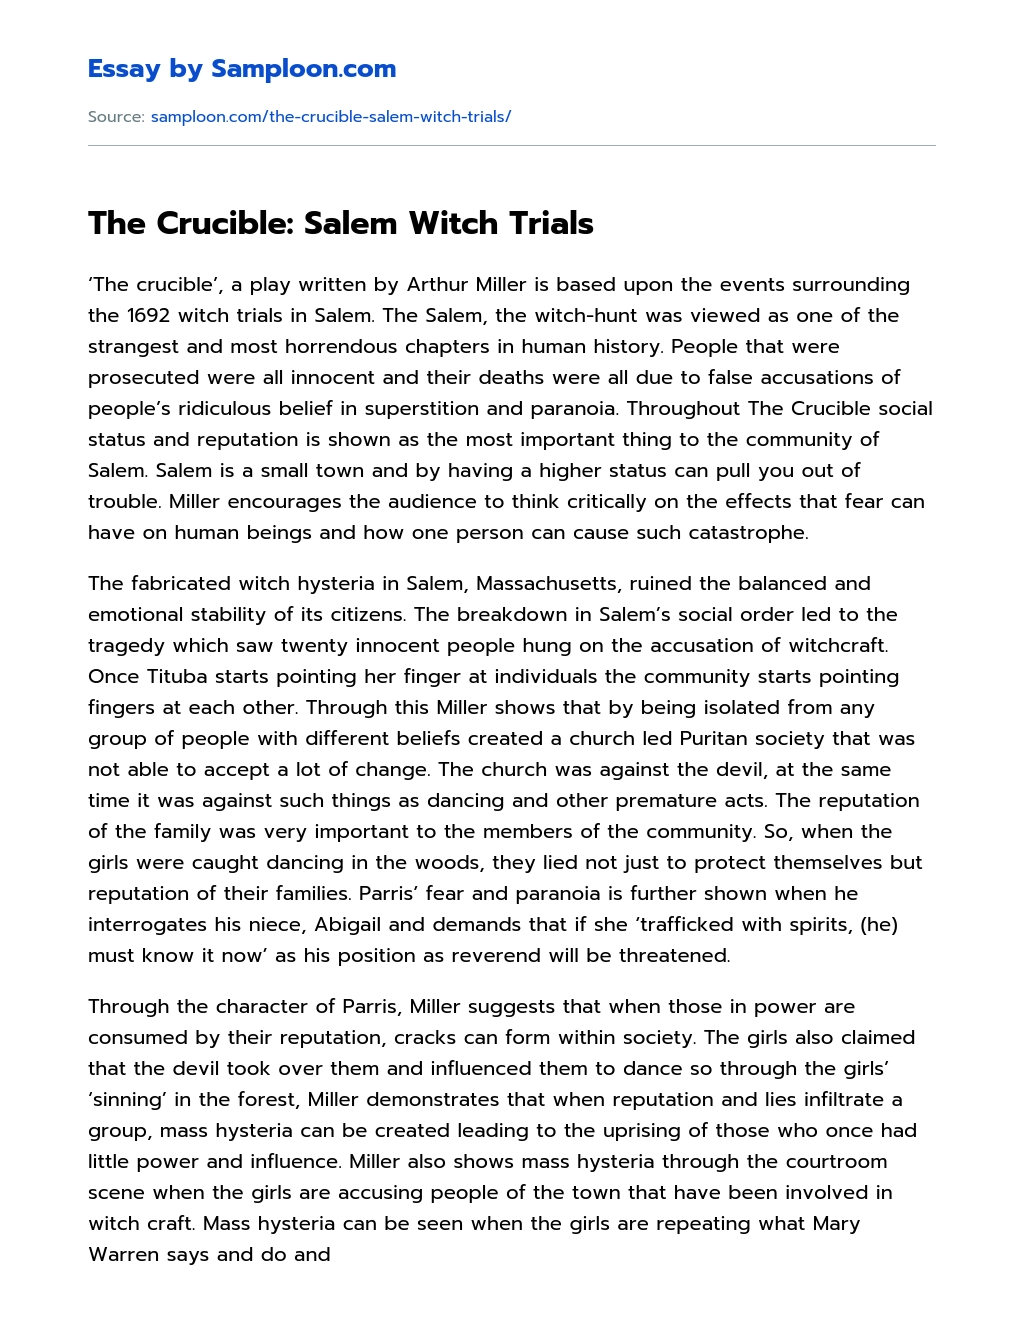 The Crucible: Salem Witch Trials essay